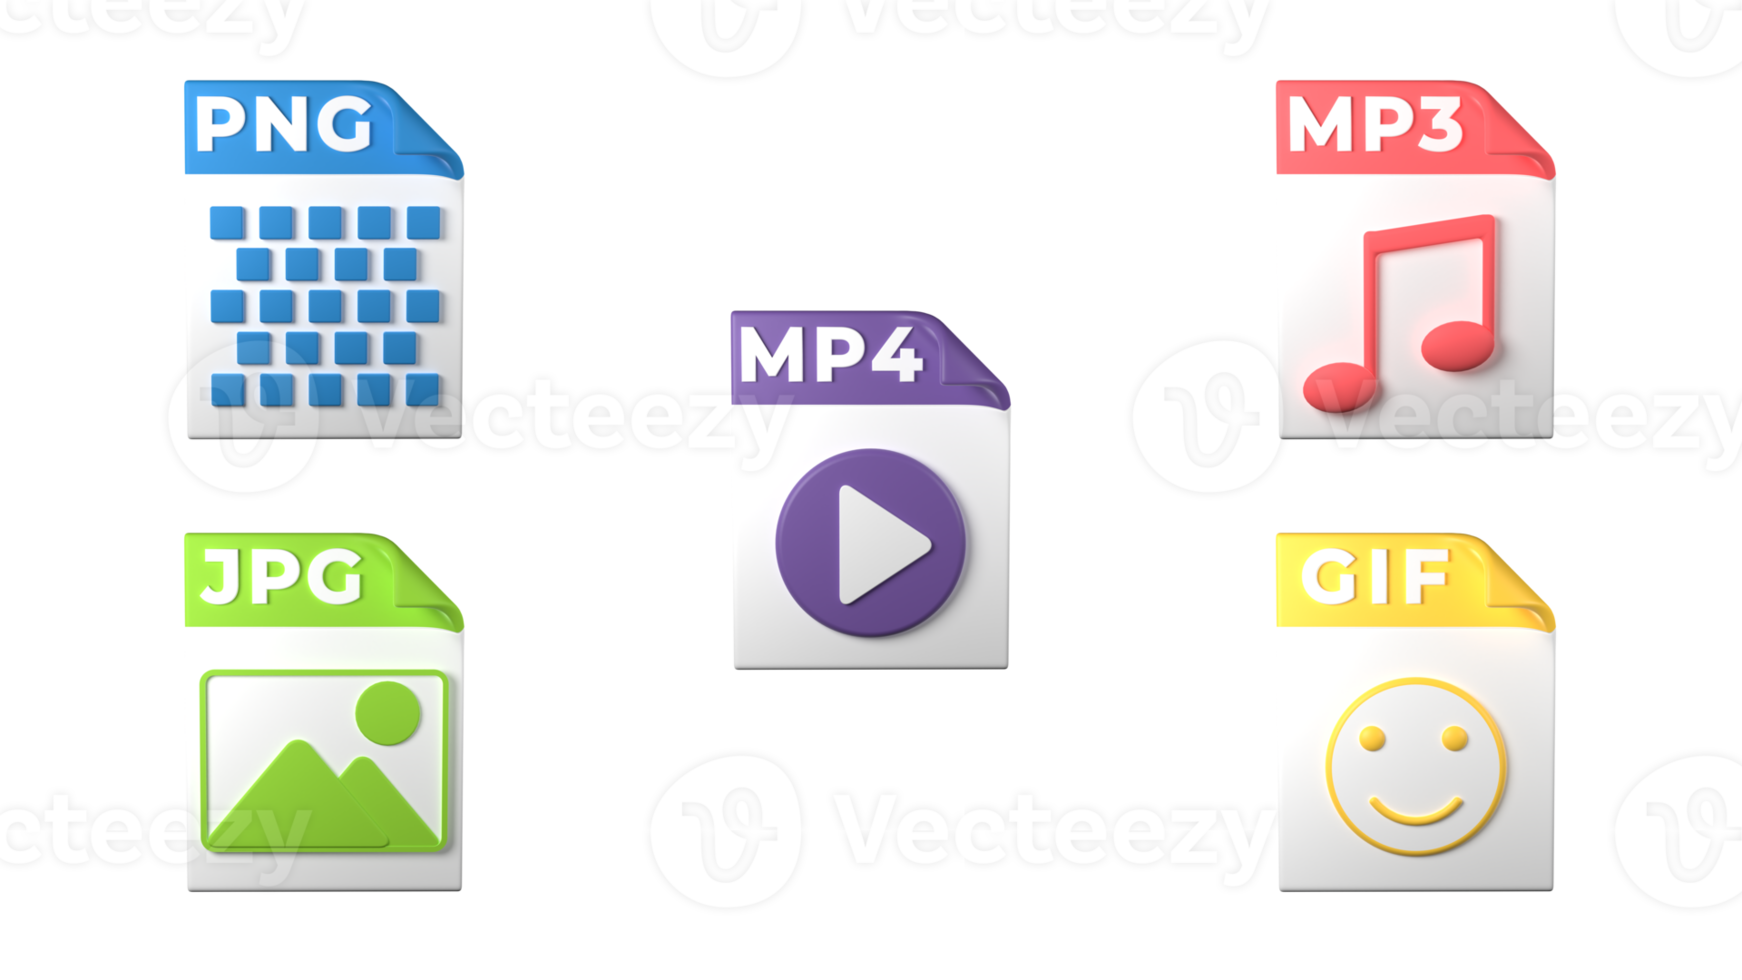 File format extensions. png, mp4, mp3, jpg, gif file format media icons. Transparent background. 3D Rendering png